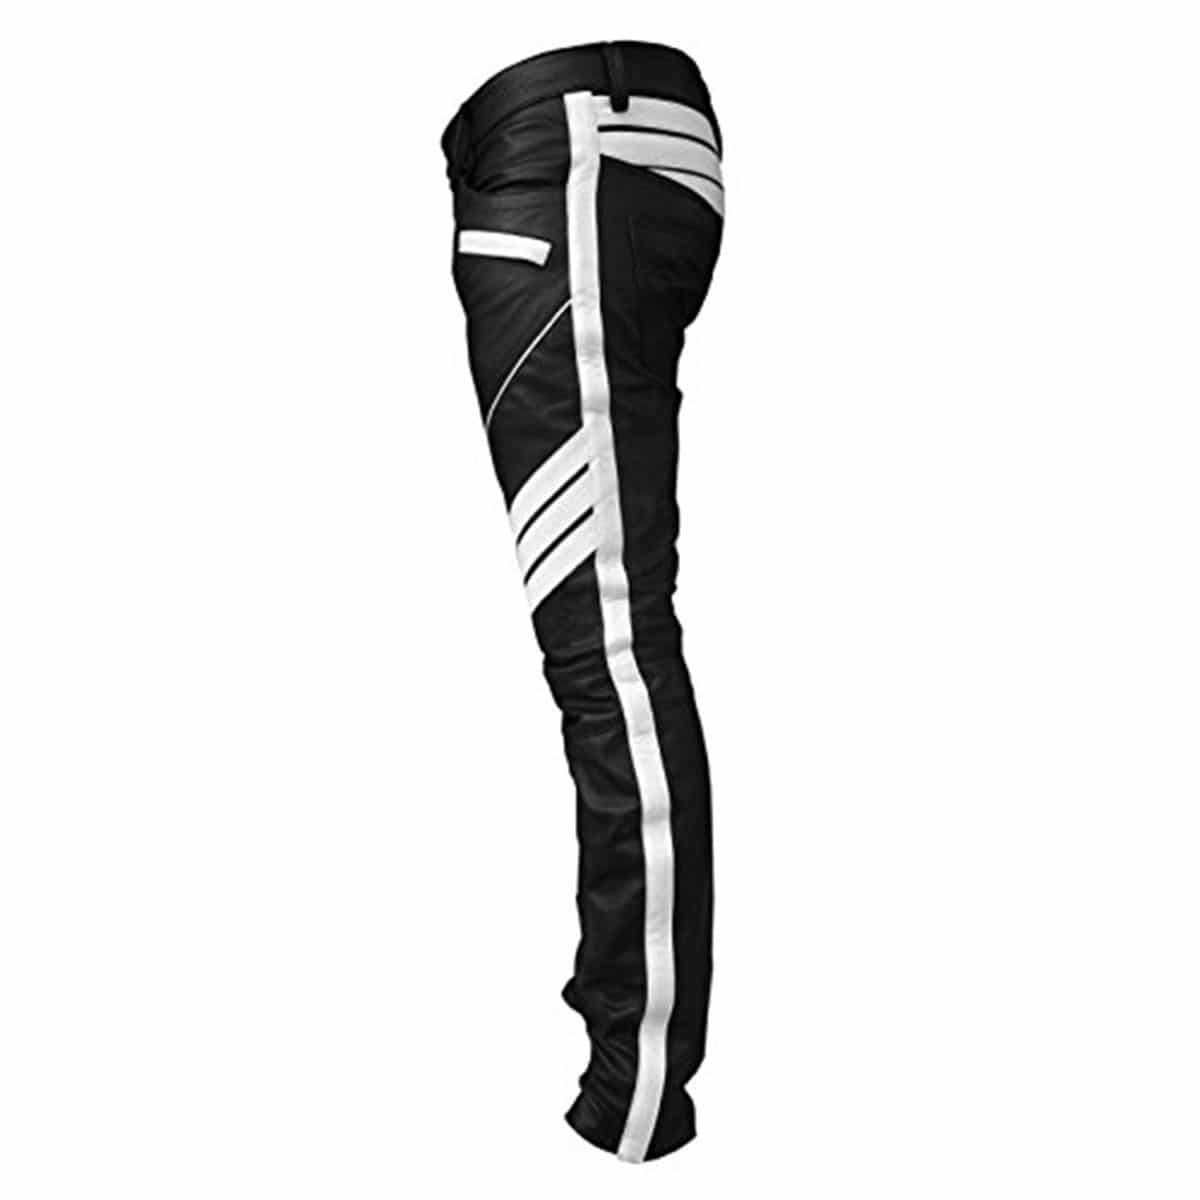 MENS BIKERS STYLE BLACK with WHITE STRIPES LEATHER PANTS JEANS TROUSER - (J5-WHT)